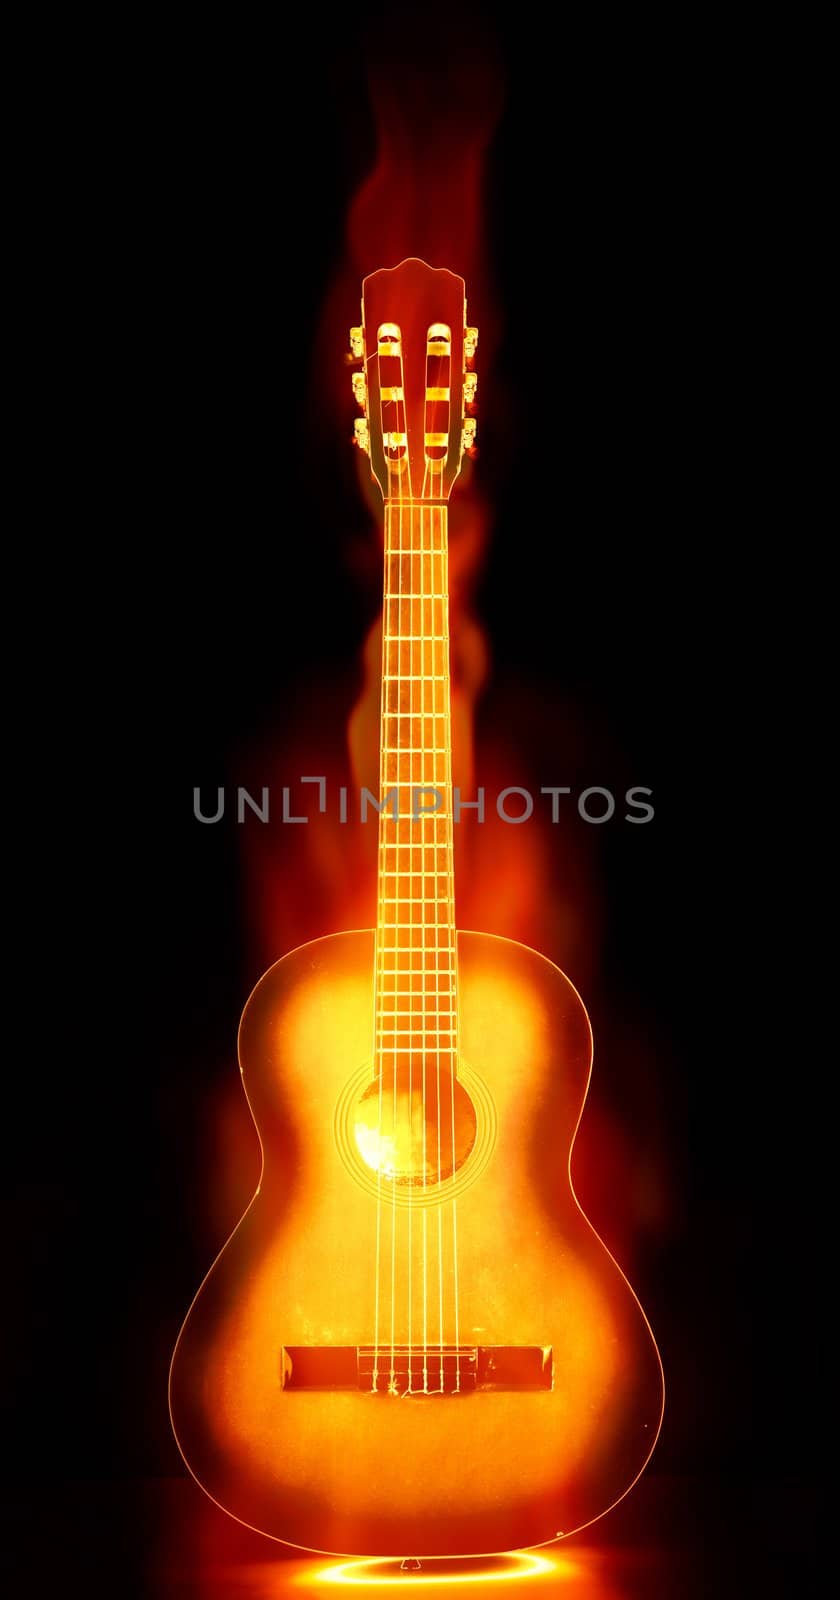 flaming guitar on fire by clearviewstock